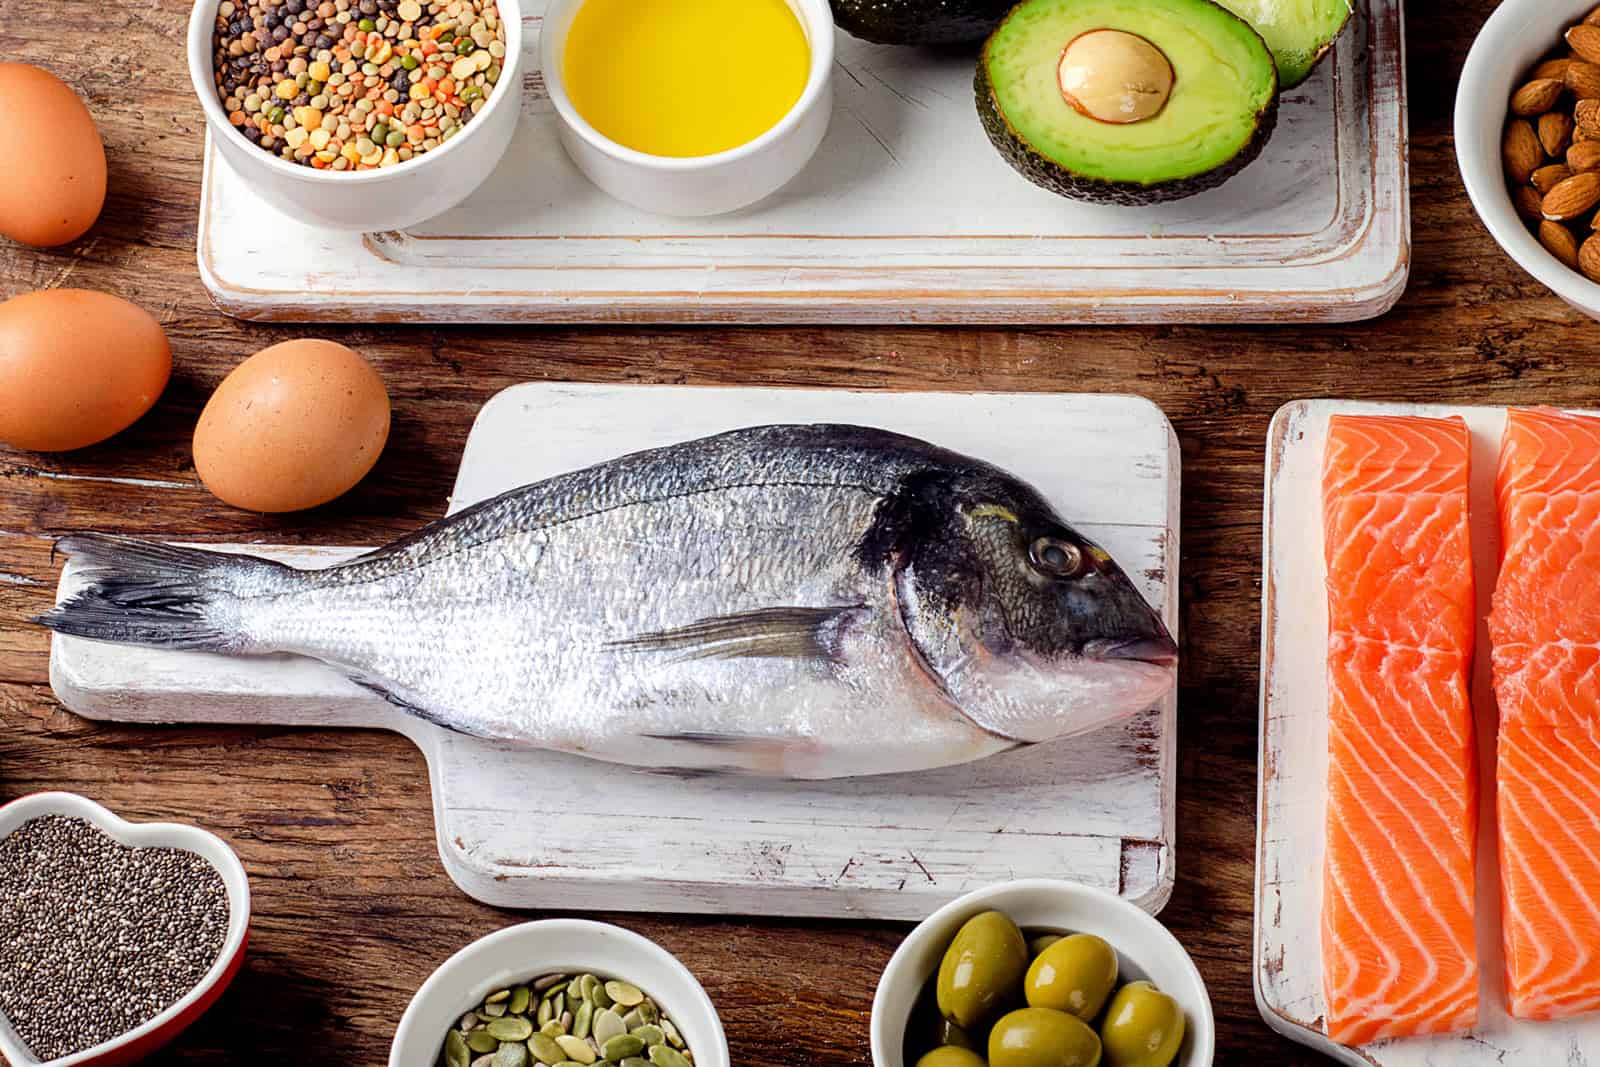 A Higher Blood Level Of Omega-3 Might Prolong The Life